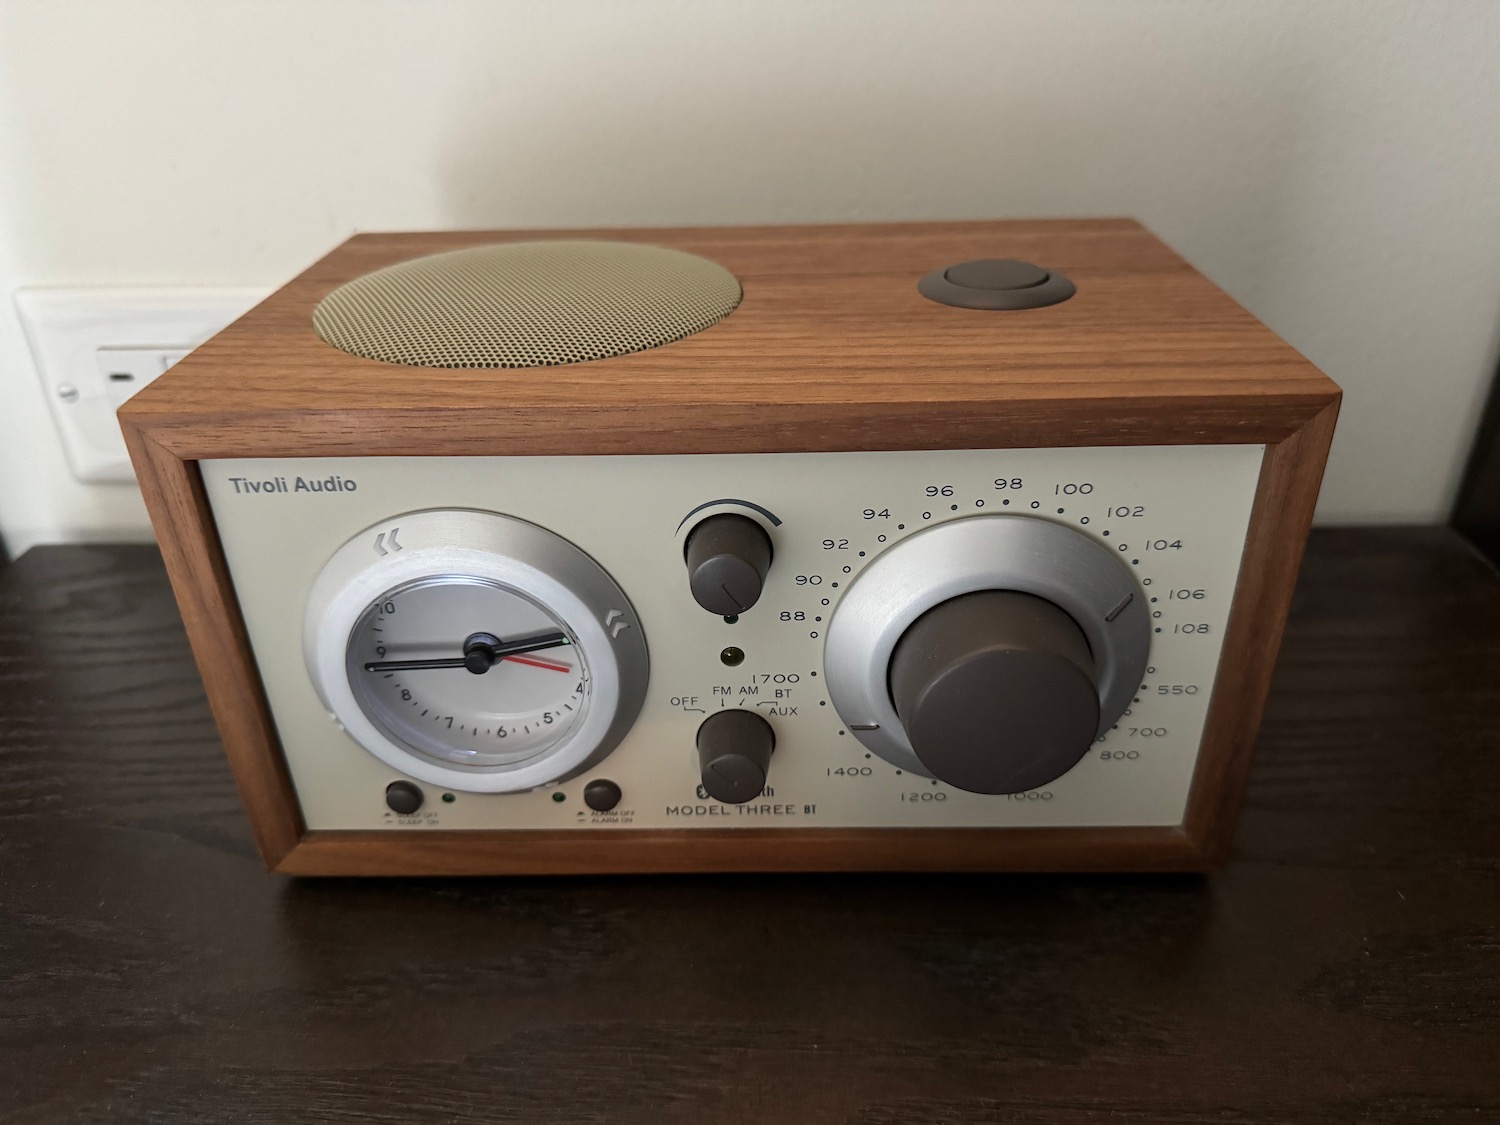 a wooden box with knobs and dials